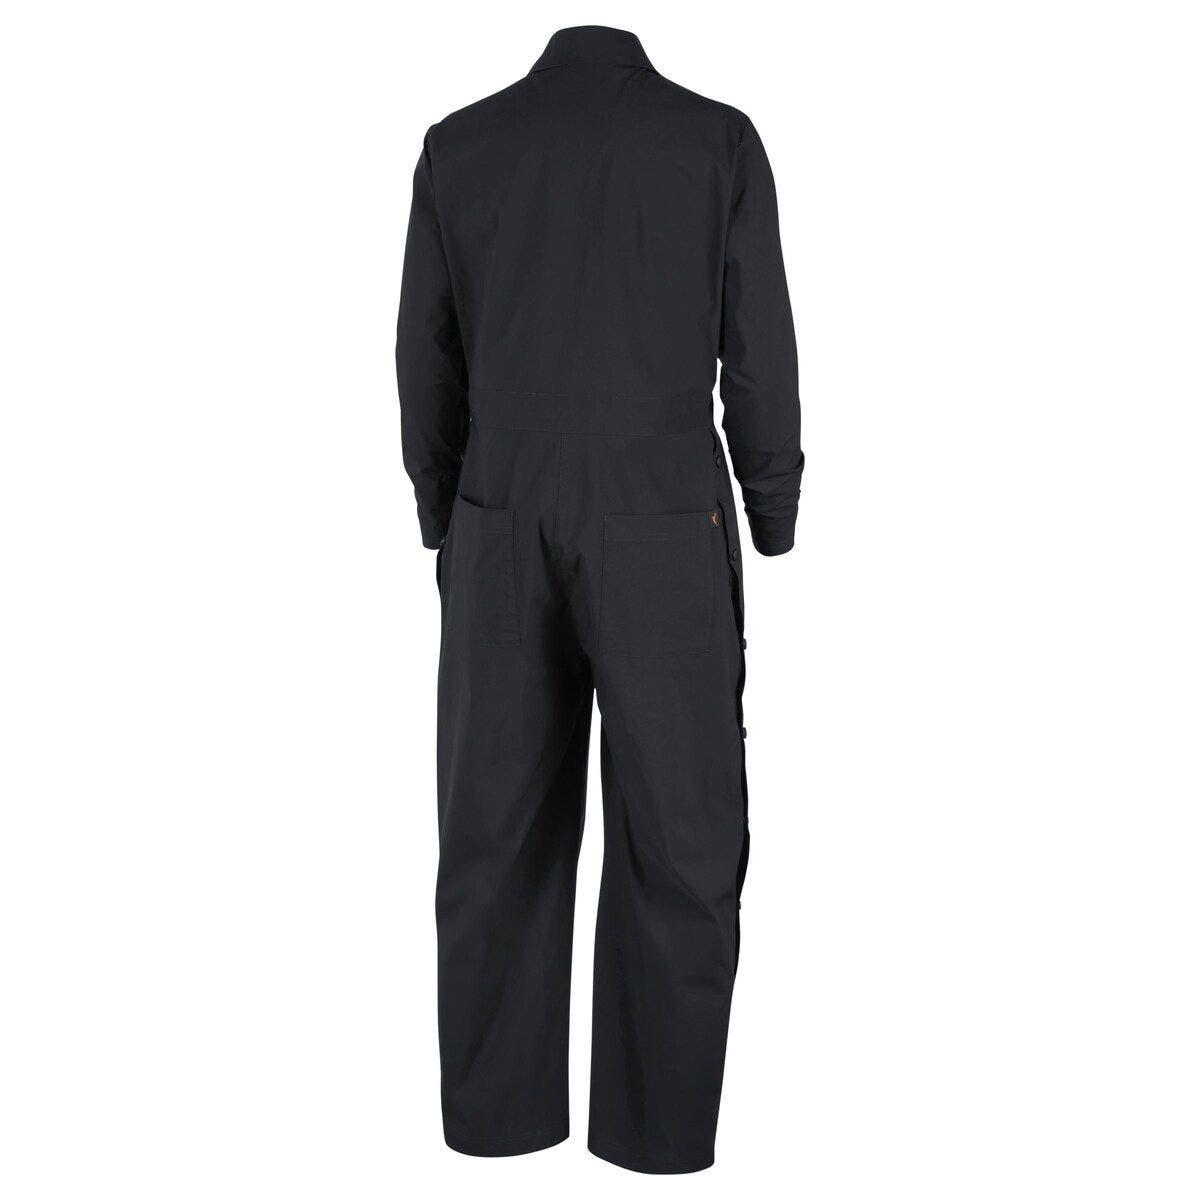 Nike Wnba Coverall Jumpsuit At Nordstrom in Black | Lyst